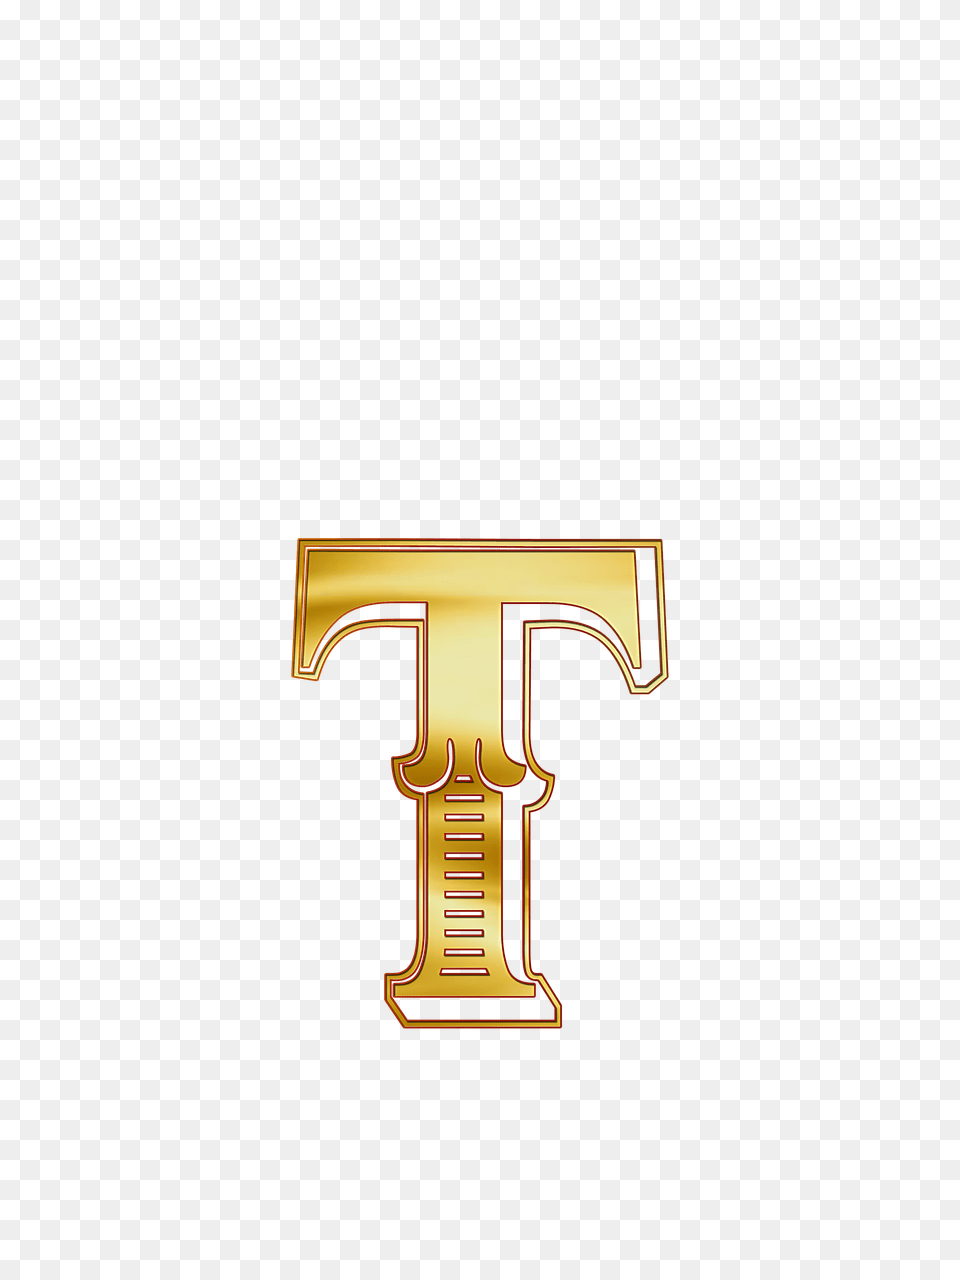 Cyrillic Small Letter T Transparent, Weapon, Blade, Dynamite Png Image